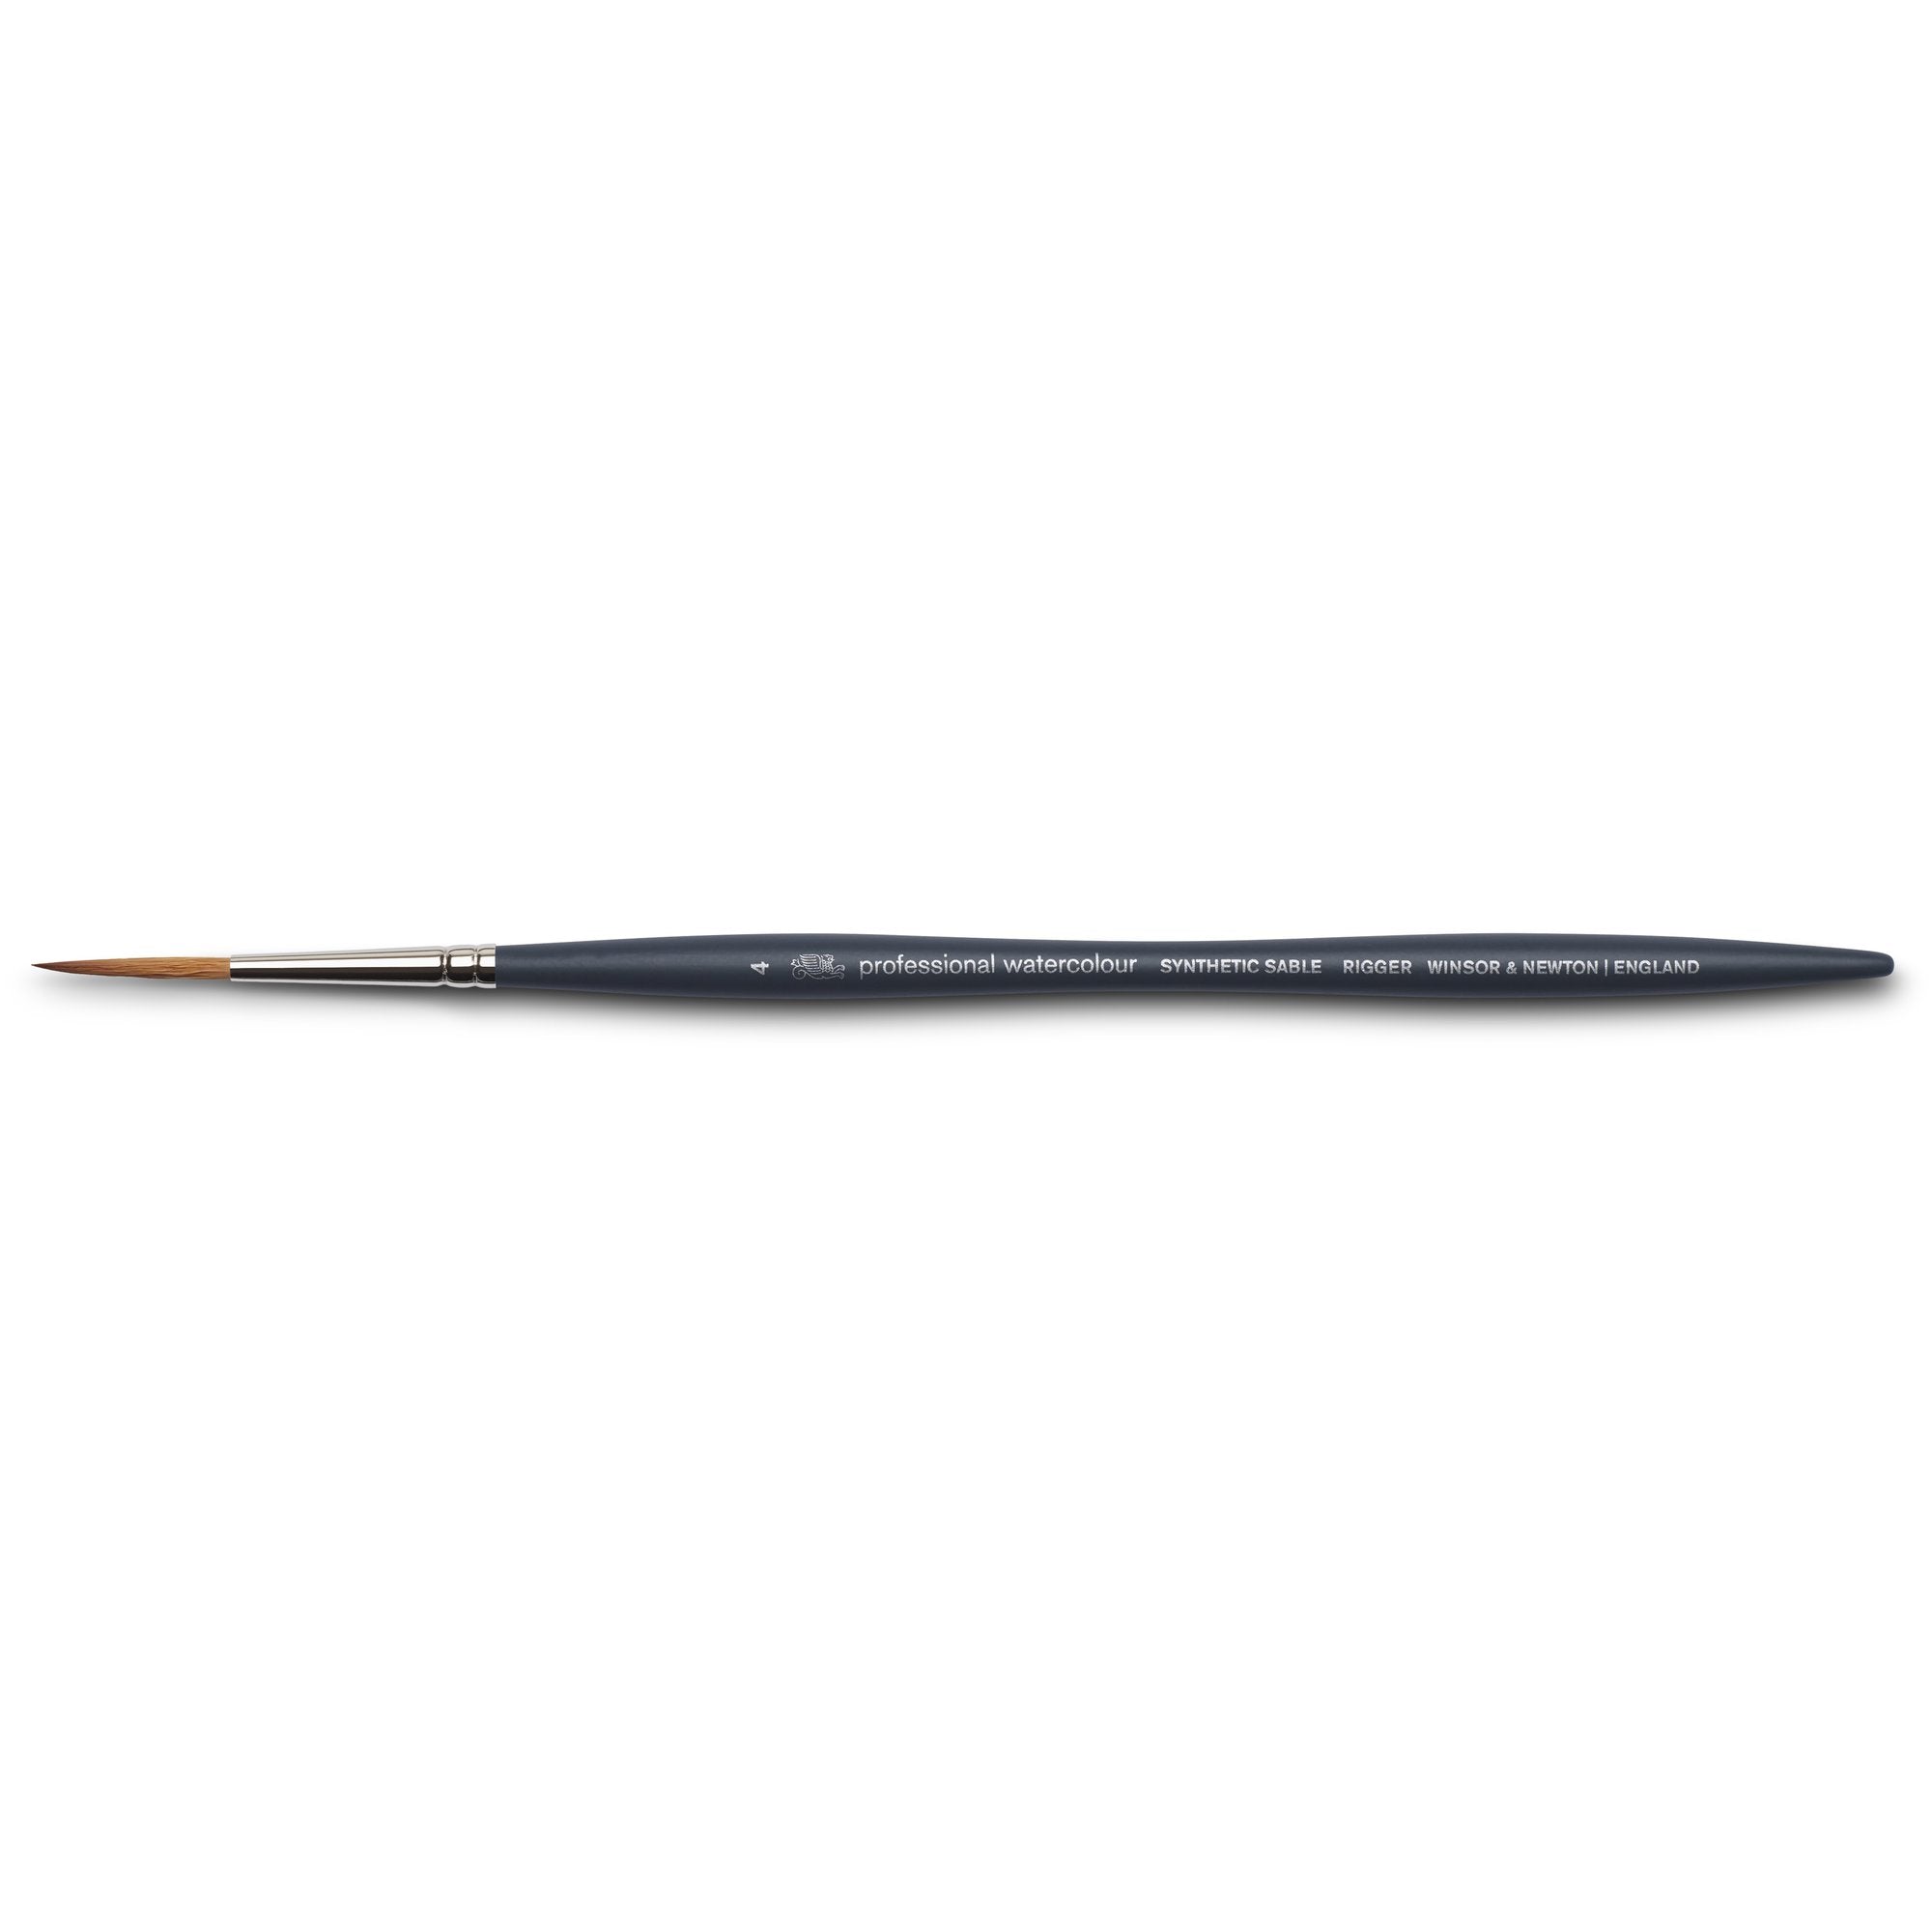 Winsor & Newton Professional Watercolour Synthetic Sable Brush Rigger 4